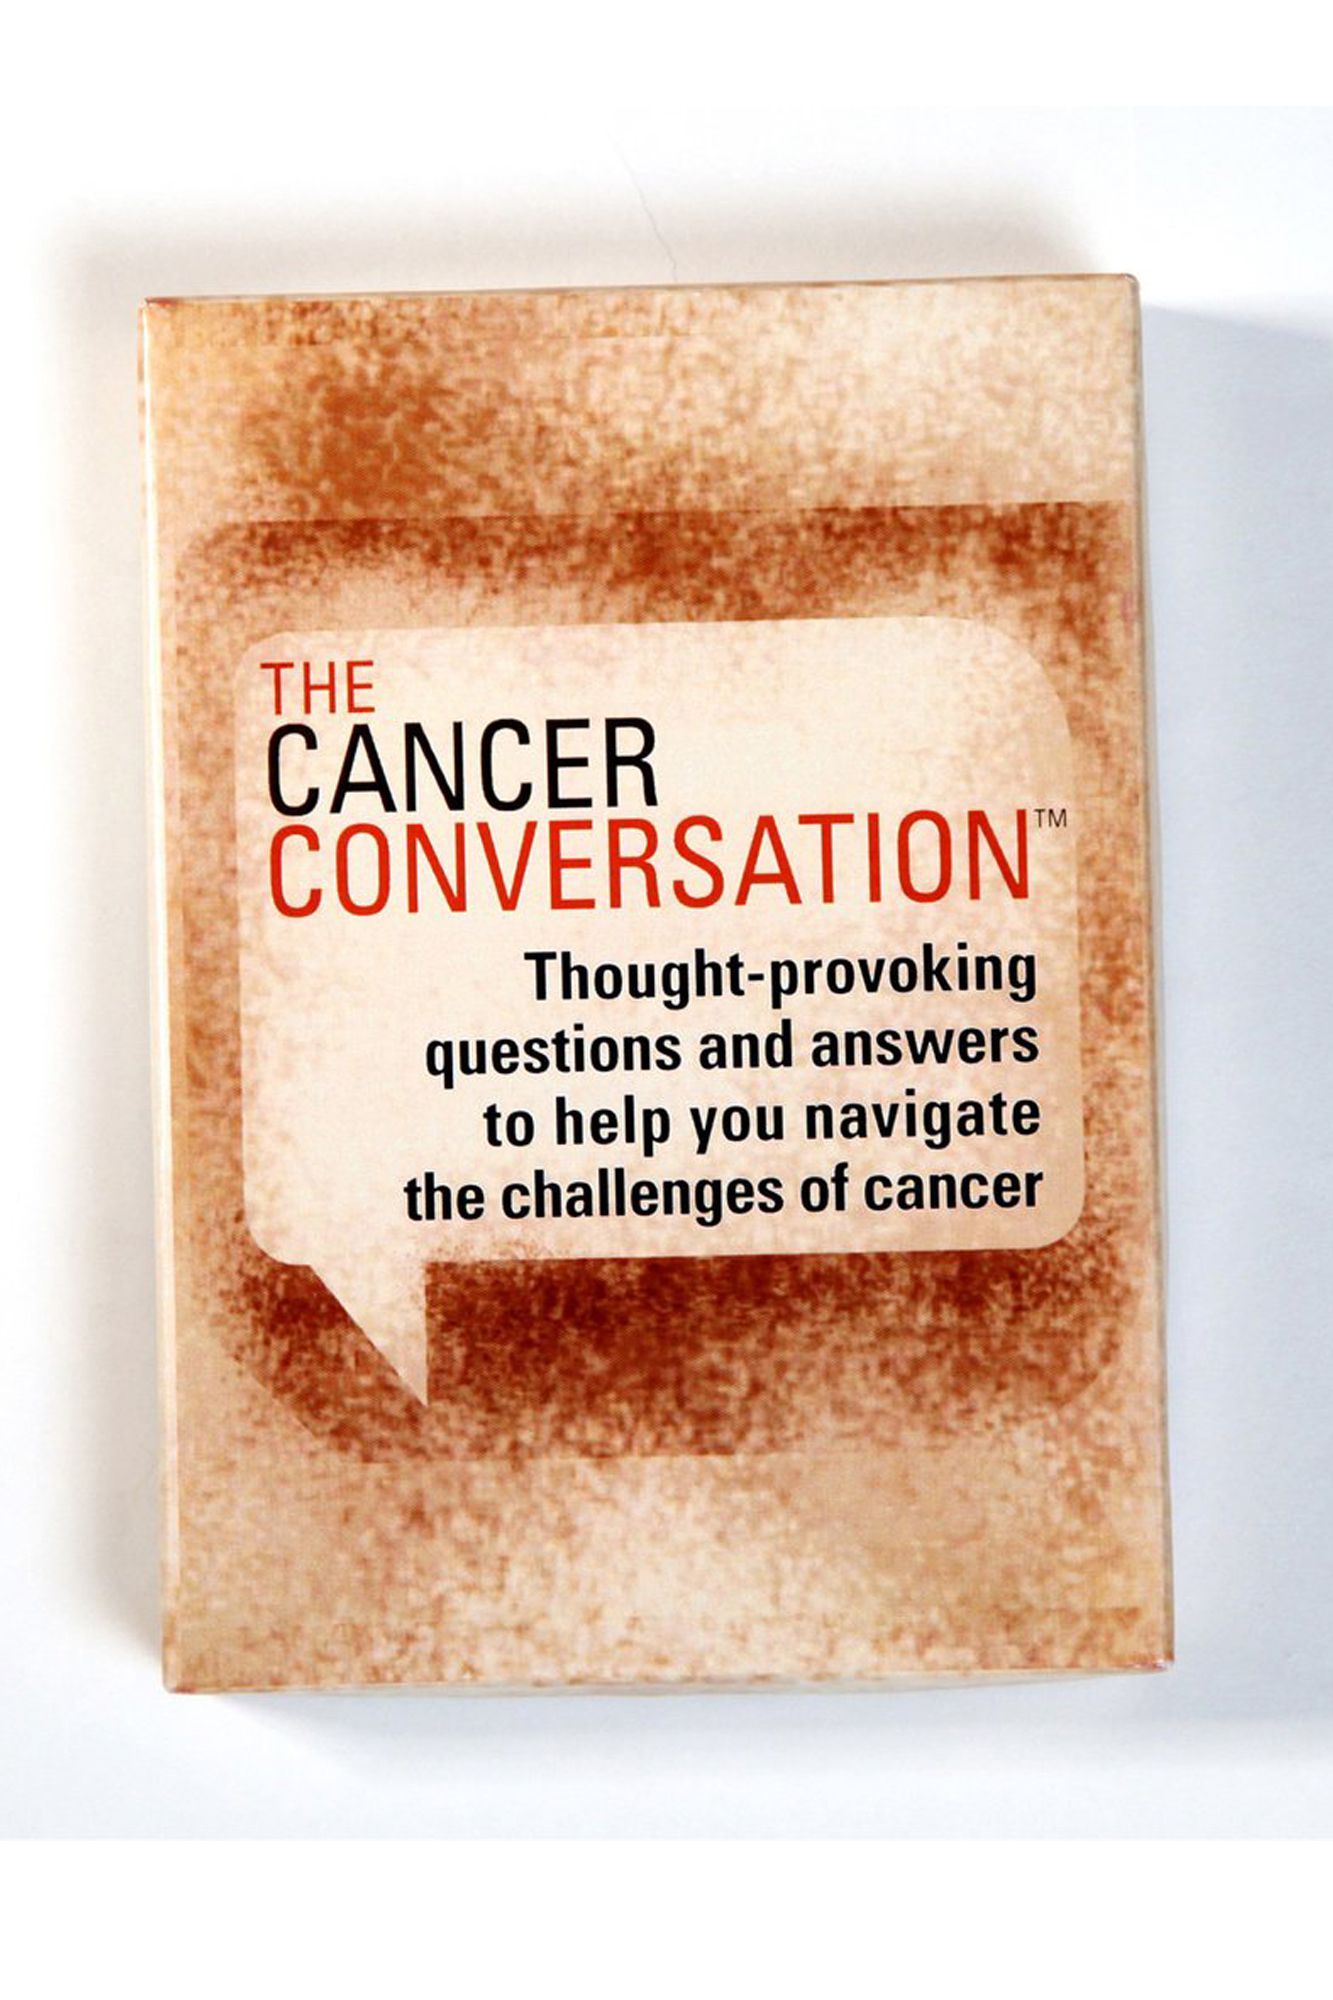 The Cancer Conversation